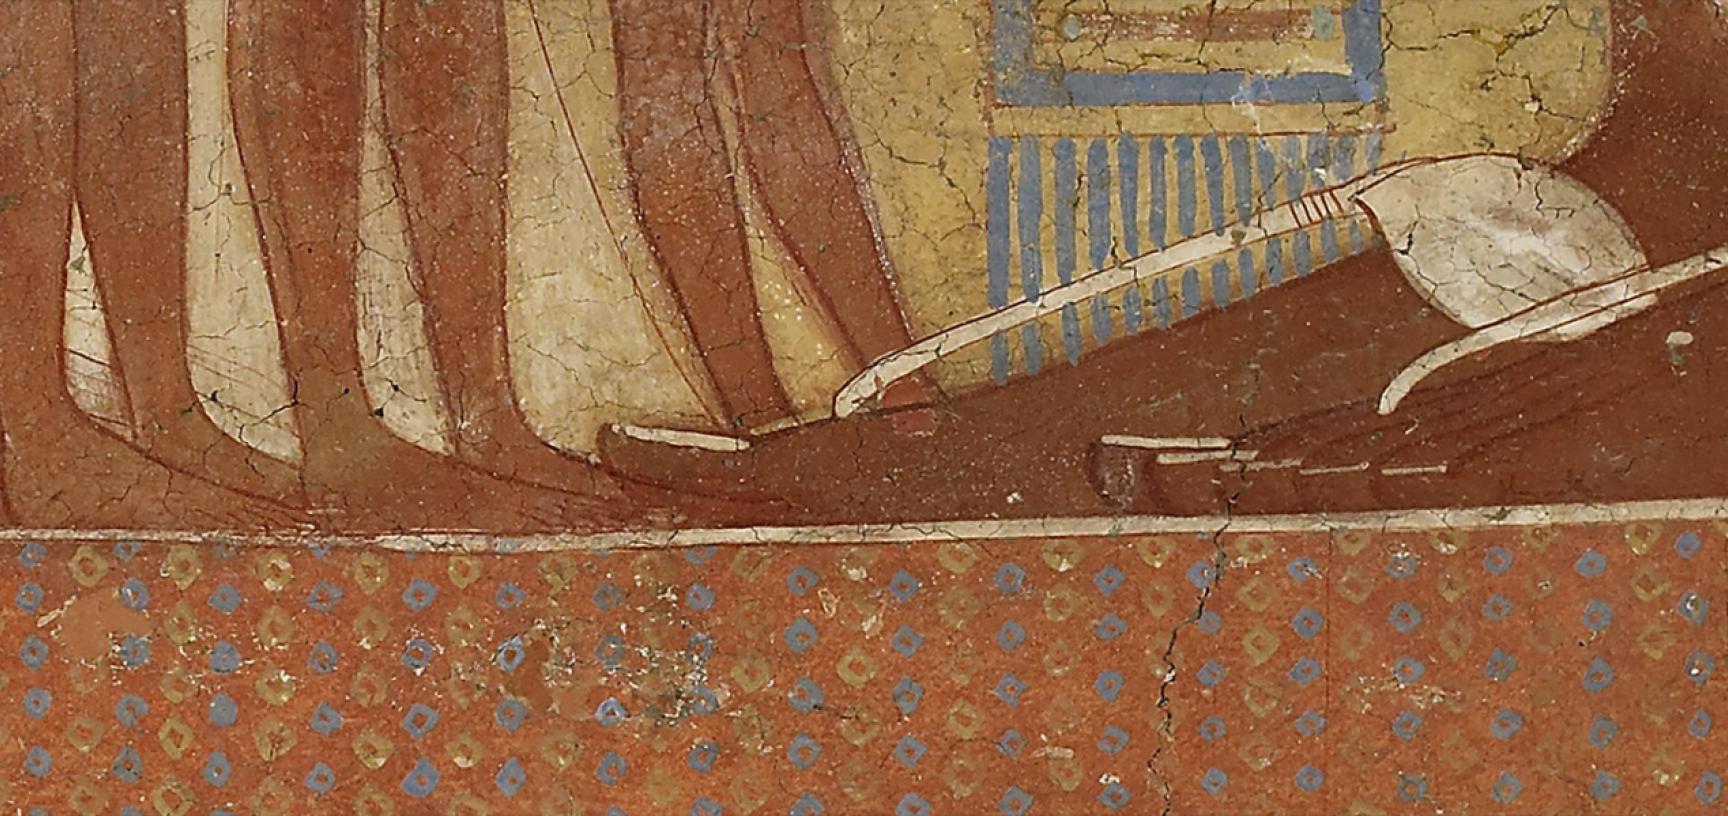 PRINCESS FRESCO (detail) from the Ashmolean collections